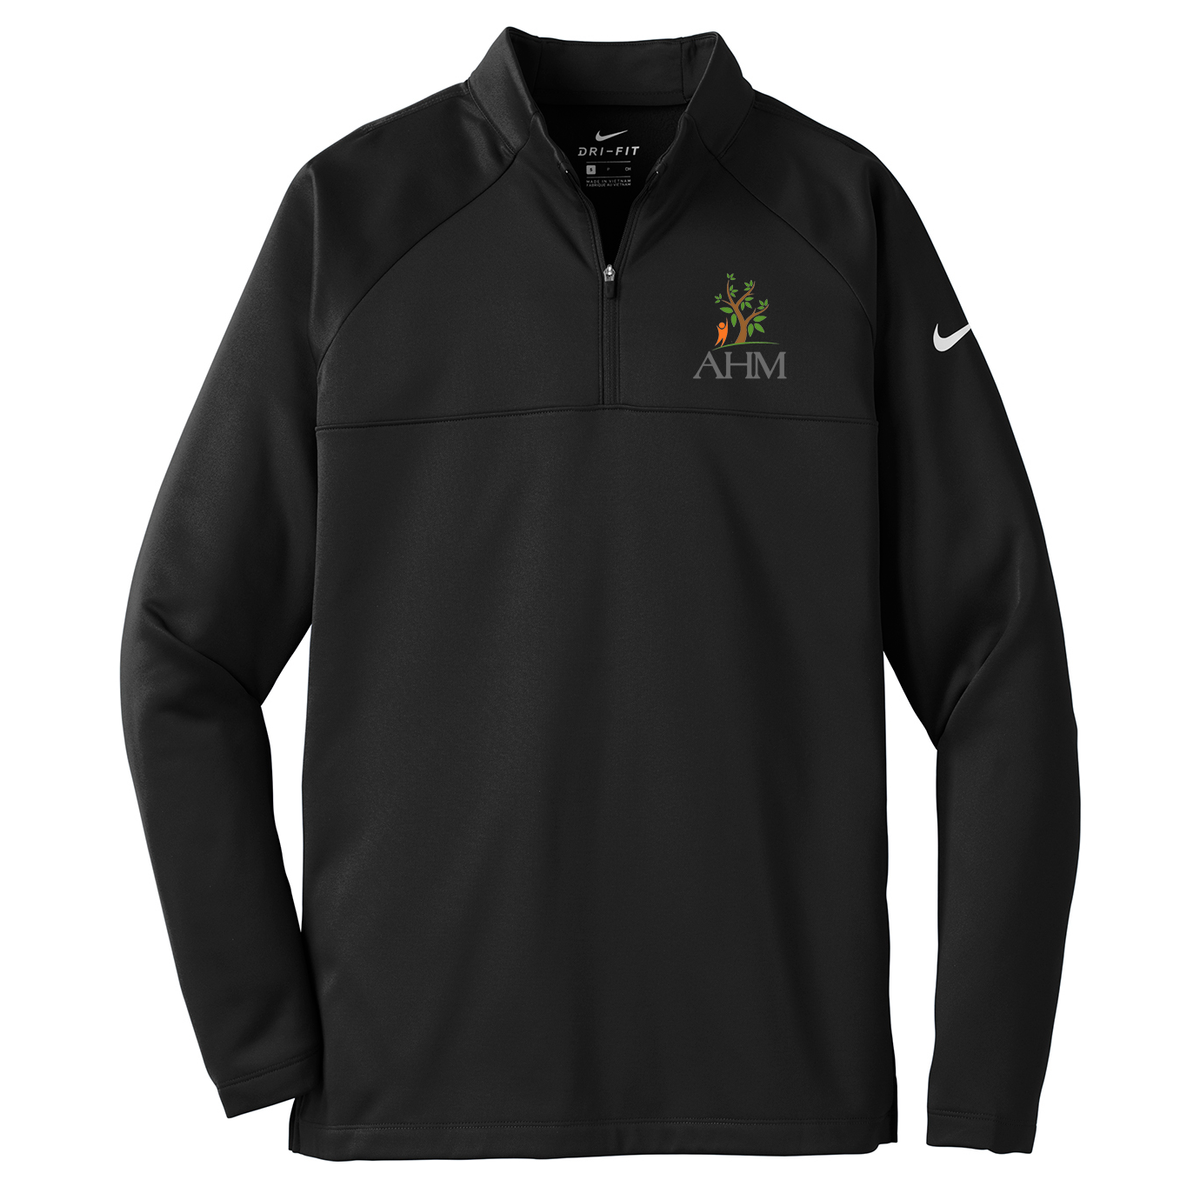 AHM Youth & Family Services Nike Therma-FIT Quarter-Zip Fleece